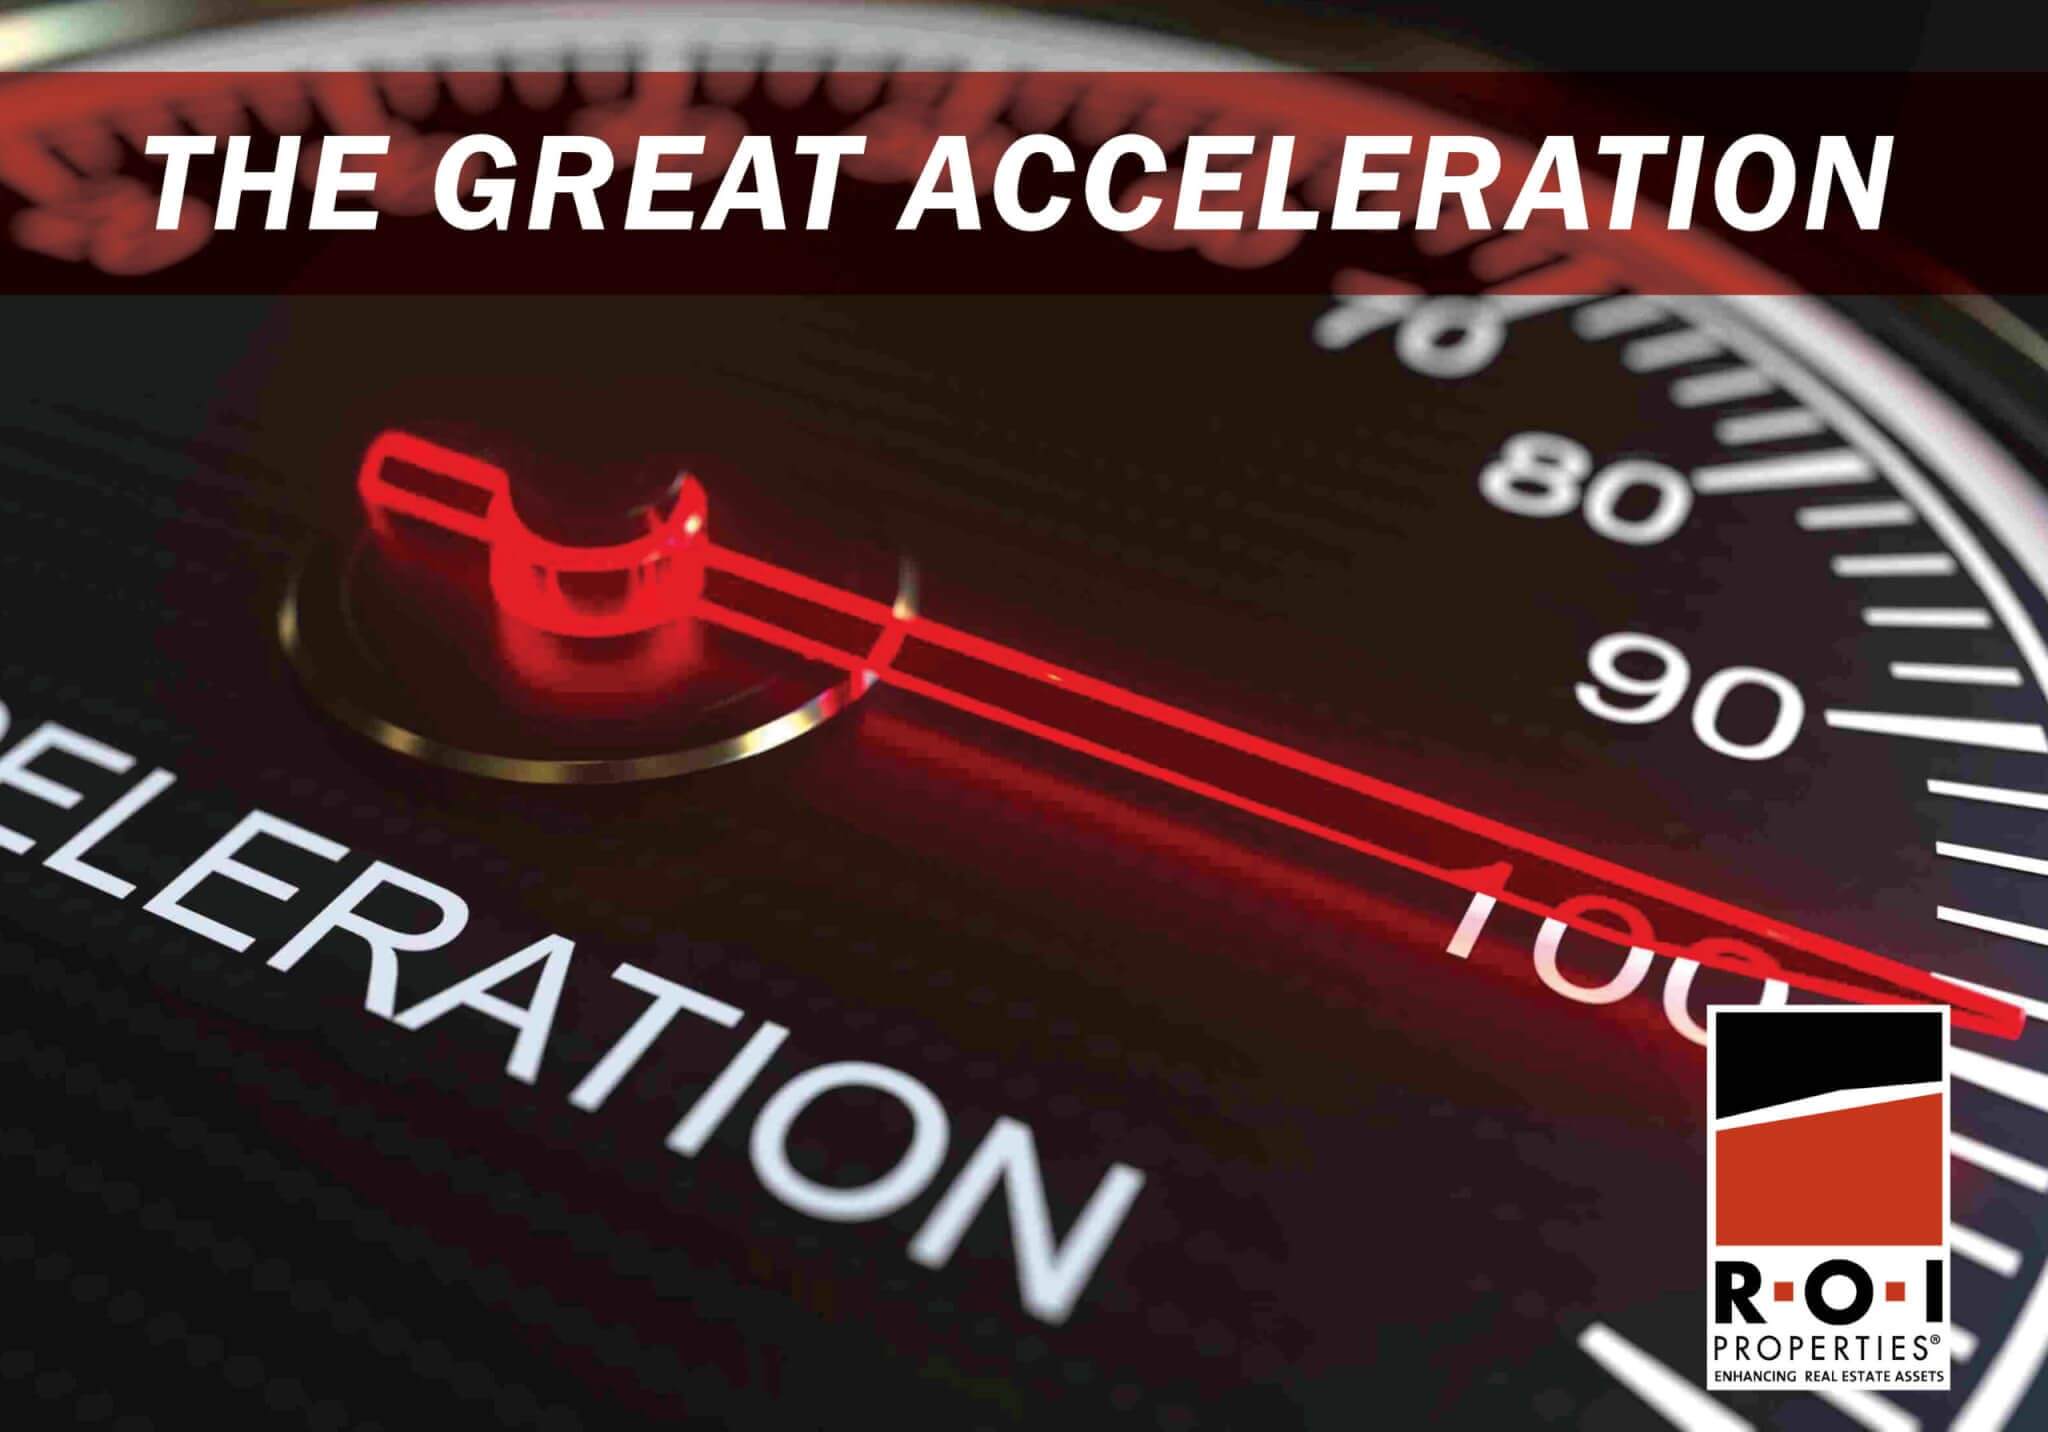 ROI Properties The Great Acceleration